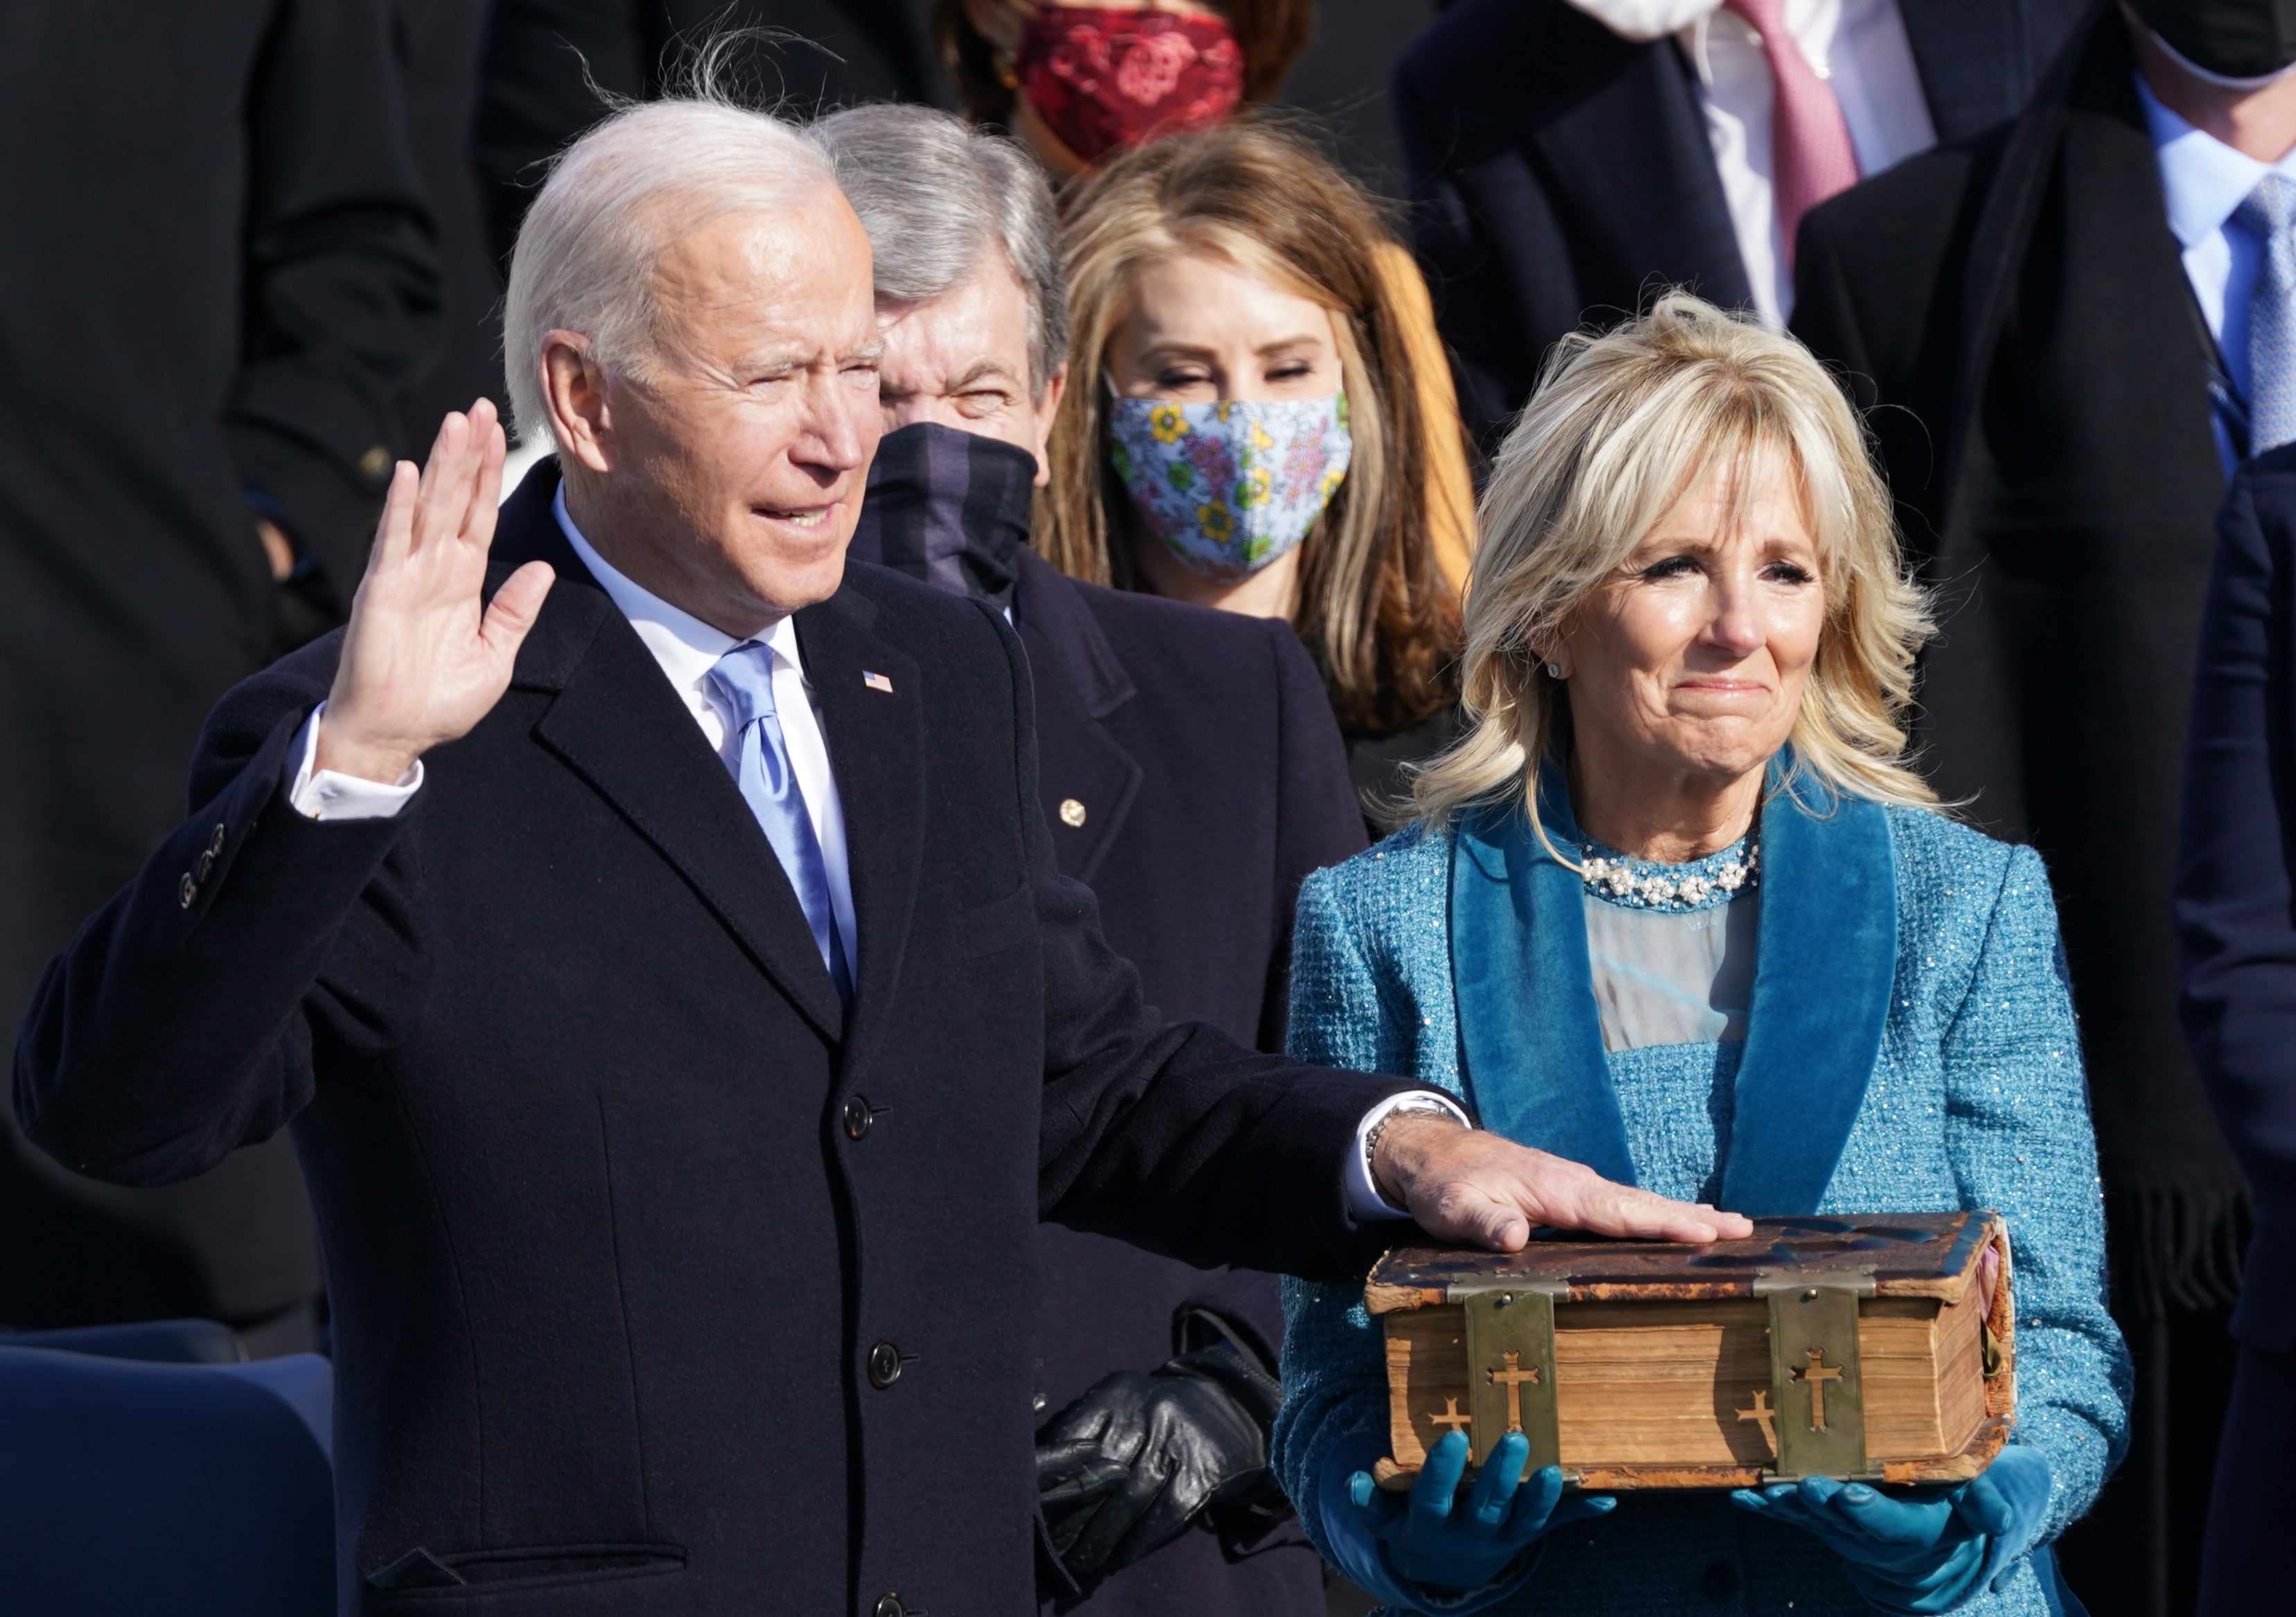 Joe Biden is sworn in as the 46th president of the United States as his wife Jill Biden holds the bible. The president welcomed a ‘day of history and hope’ after taking Oath of Office saying: ‘This is America’s day. This is democracy’s day. A day of history and hope’